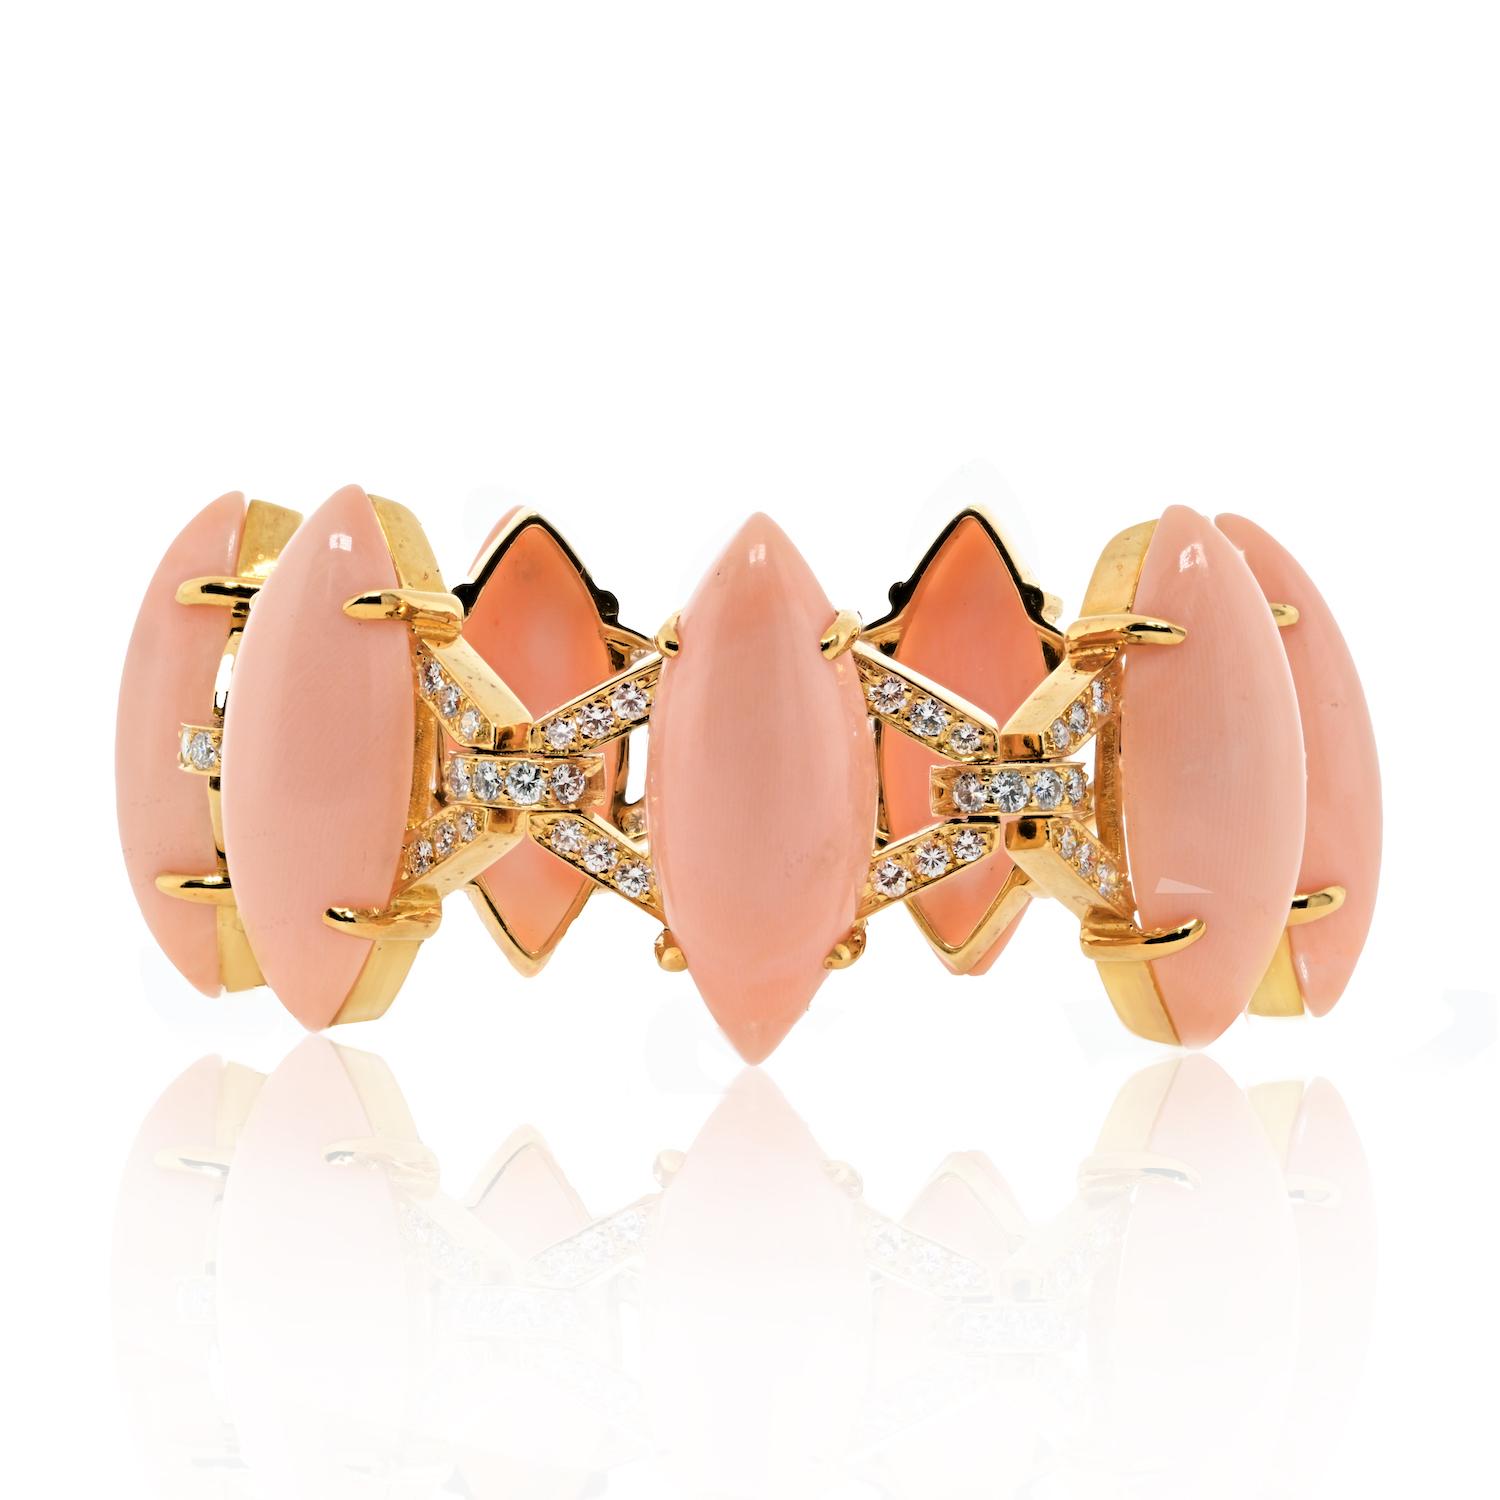 Indulge in the exquisite beauty of the David Webb Coral Bracelet, a masterpiece that combines the warmth of 18K yellow gold with the vibrant allure of marquise-shaped coral cabochons and the dazzling brilliance of round diamonds.

**Materials and